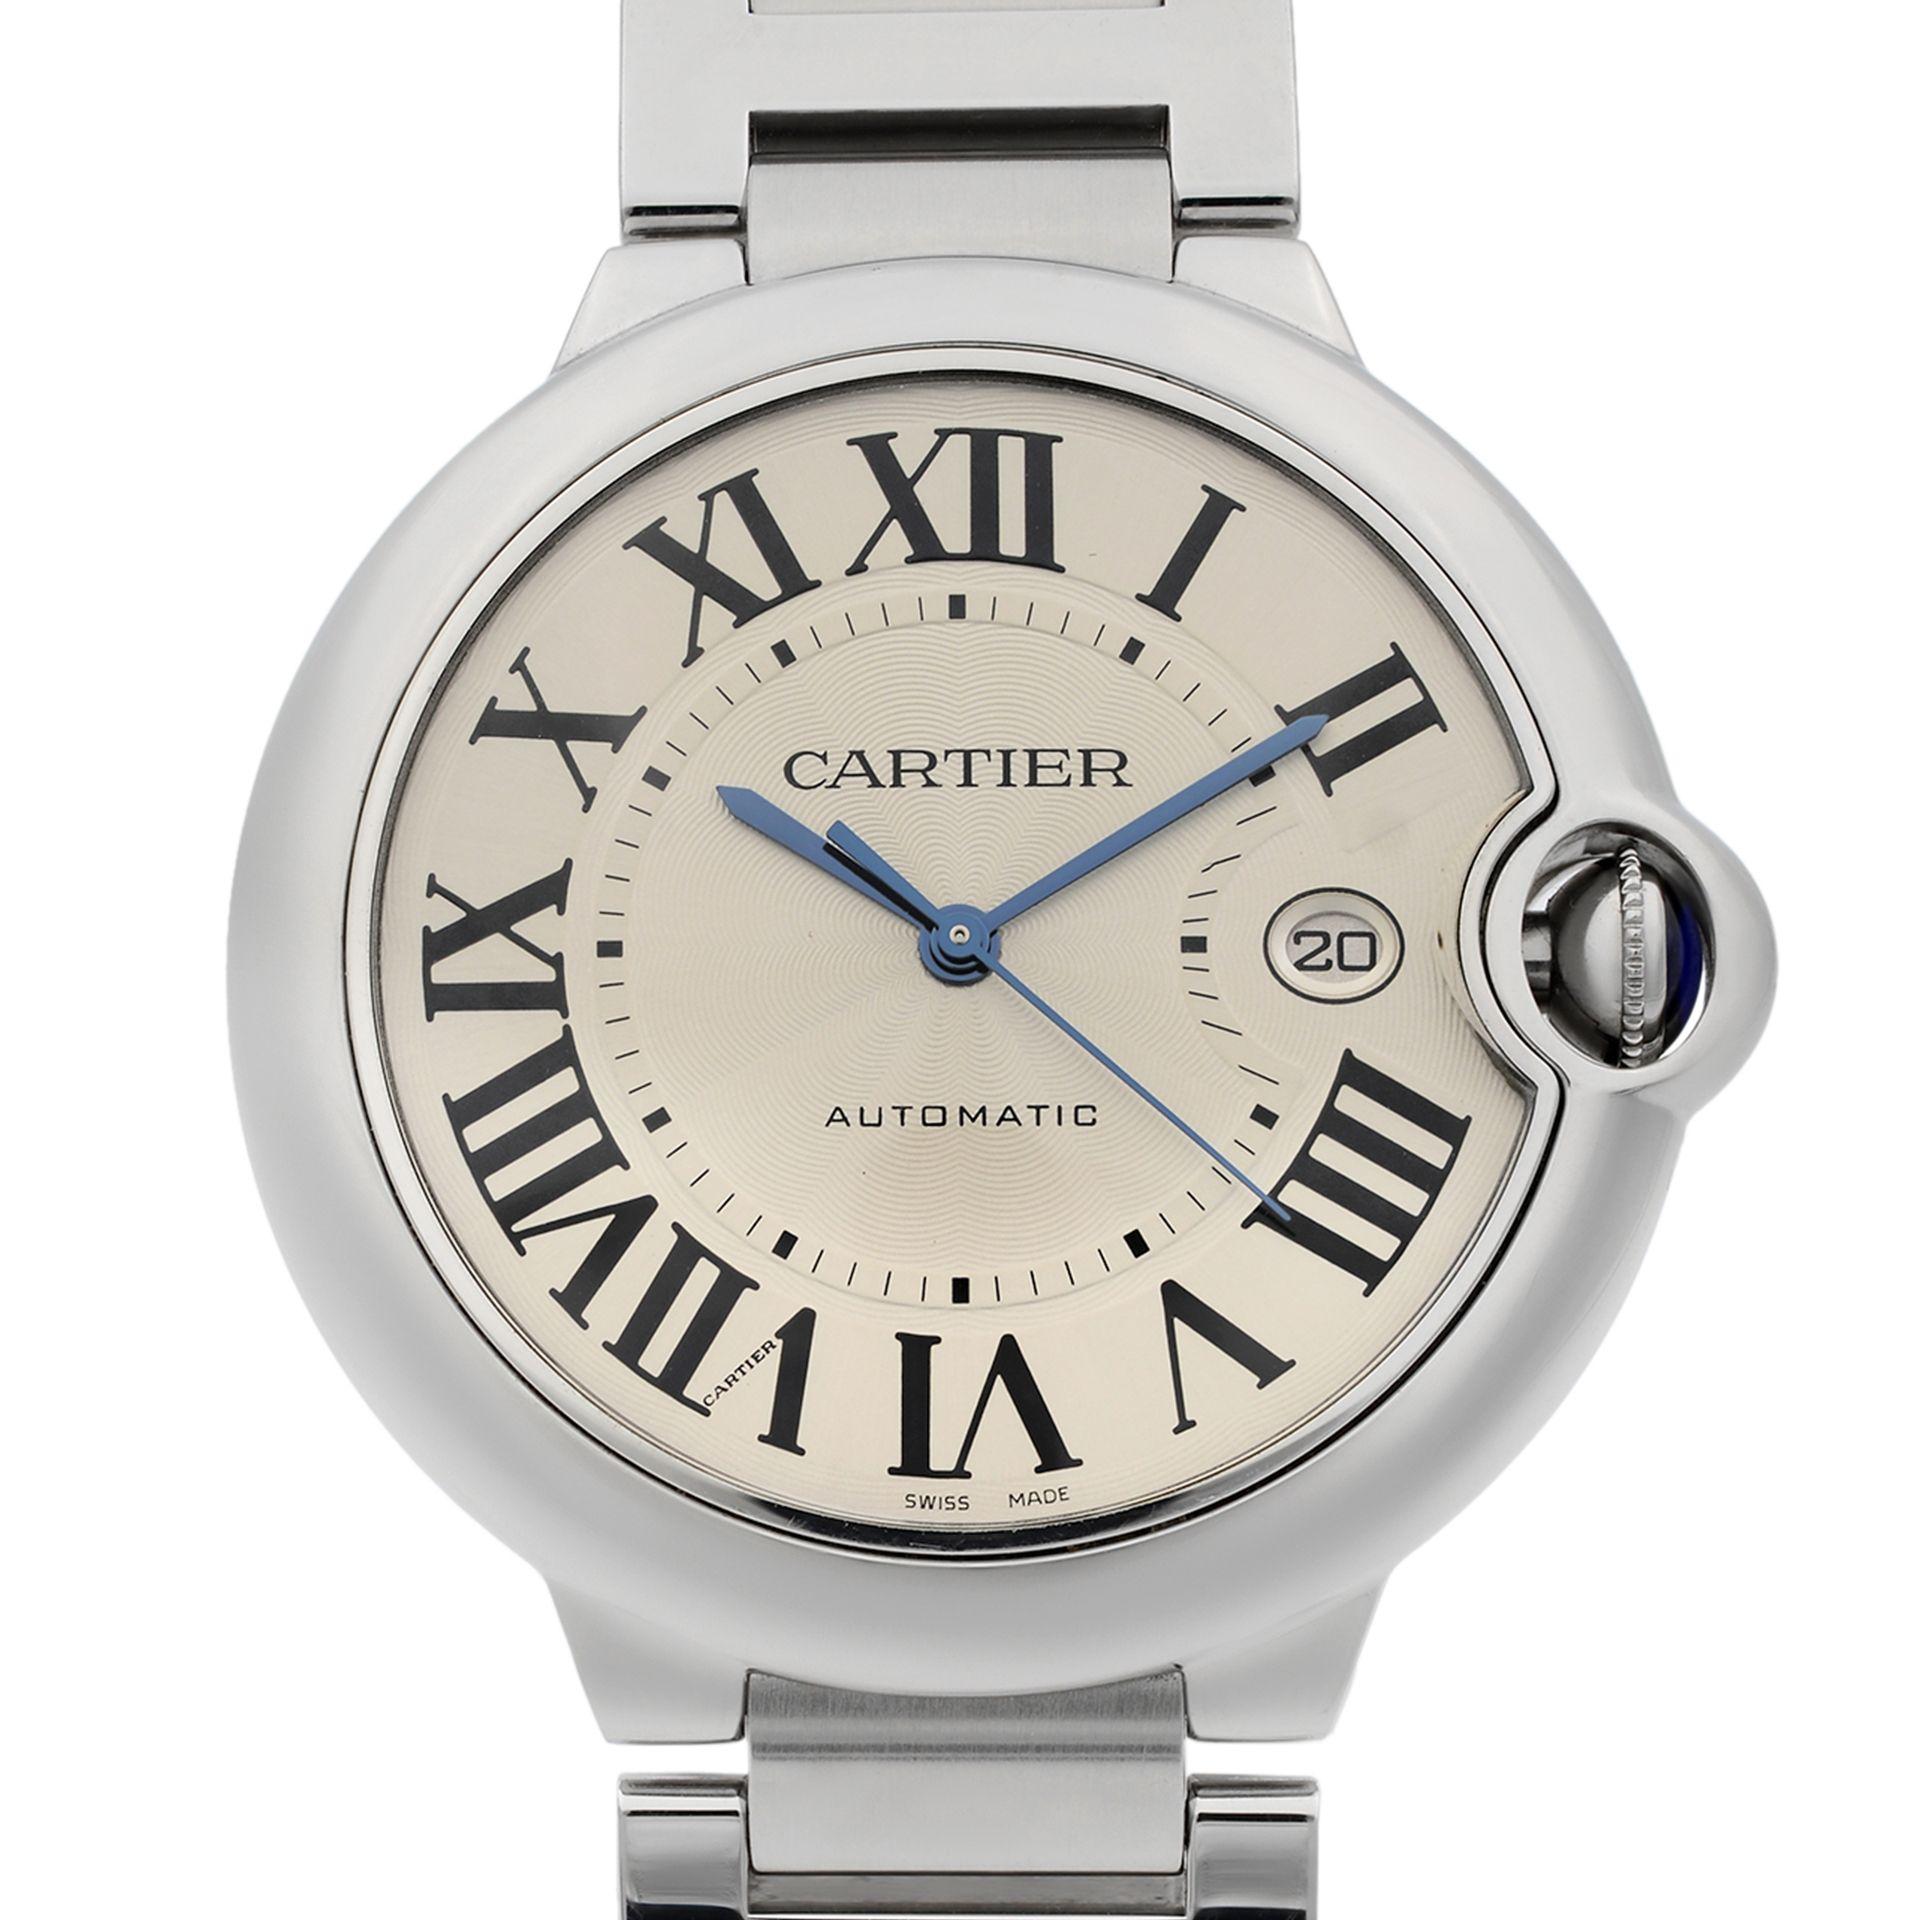 This pre-owned Cartier Ballon Bleu W69012Z4  is a beautiful men's timepiece that is powered by mechanical (automatic) movement which is cased in a stainless steel case. It has a round shape face, date indicator dial and has hand roman numerals style